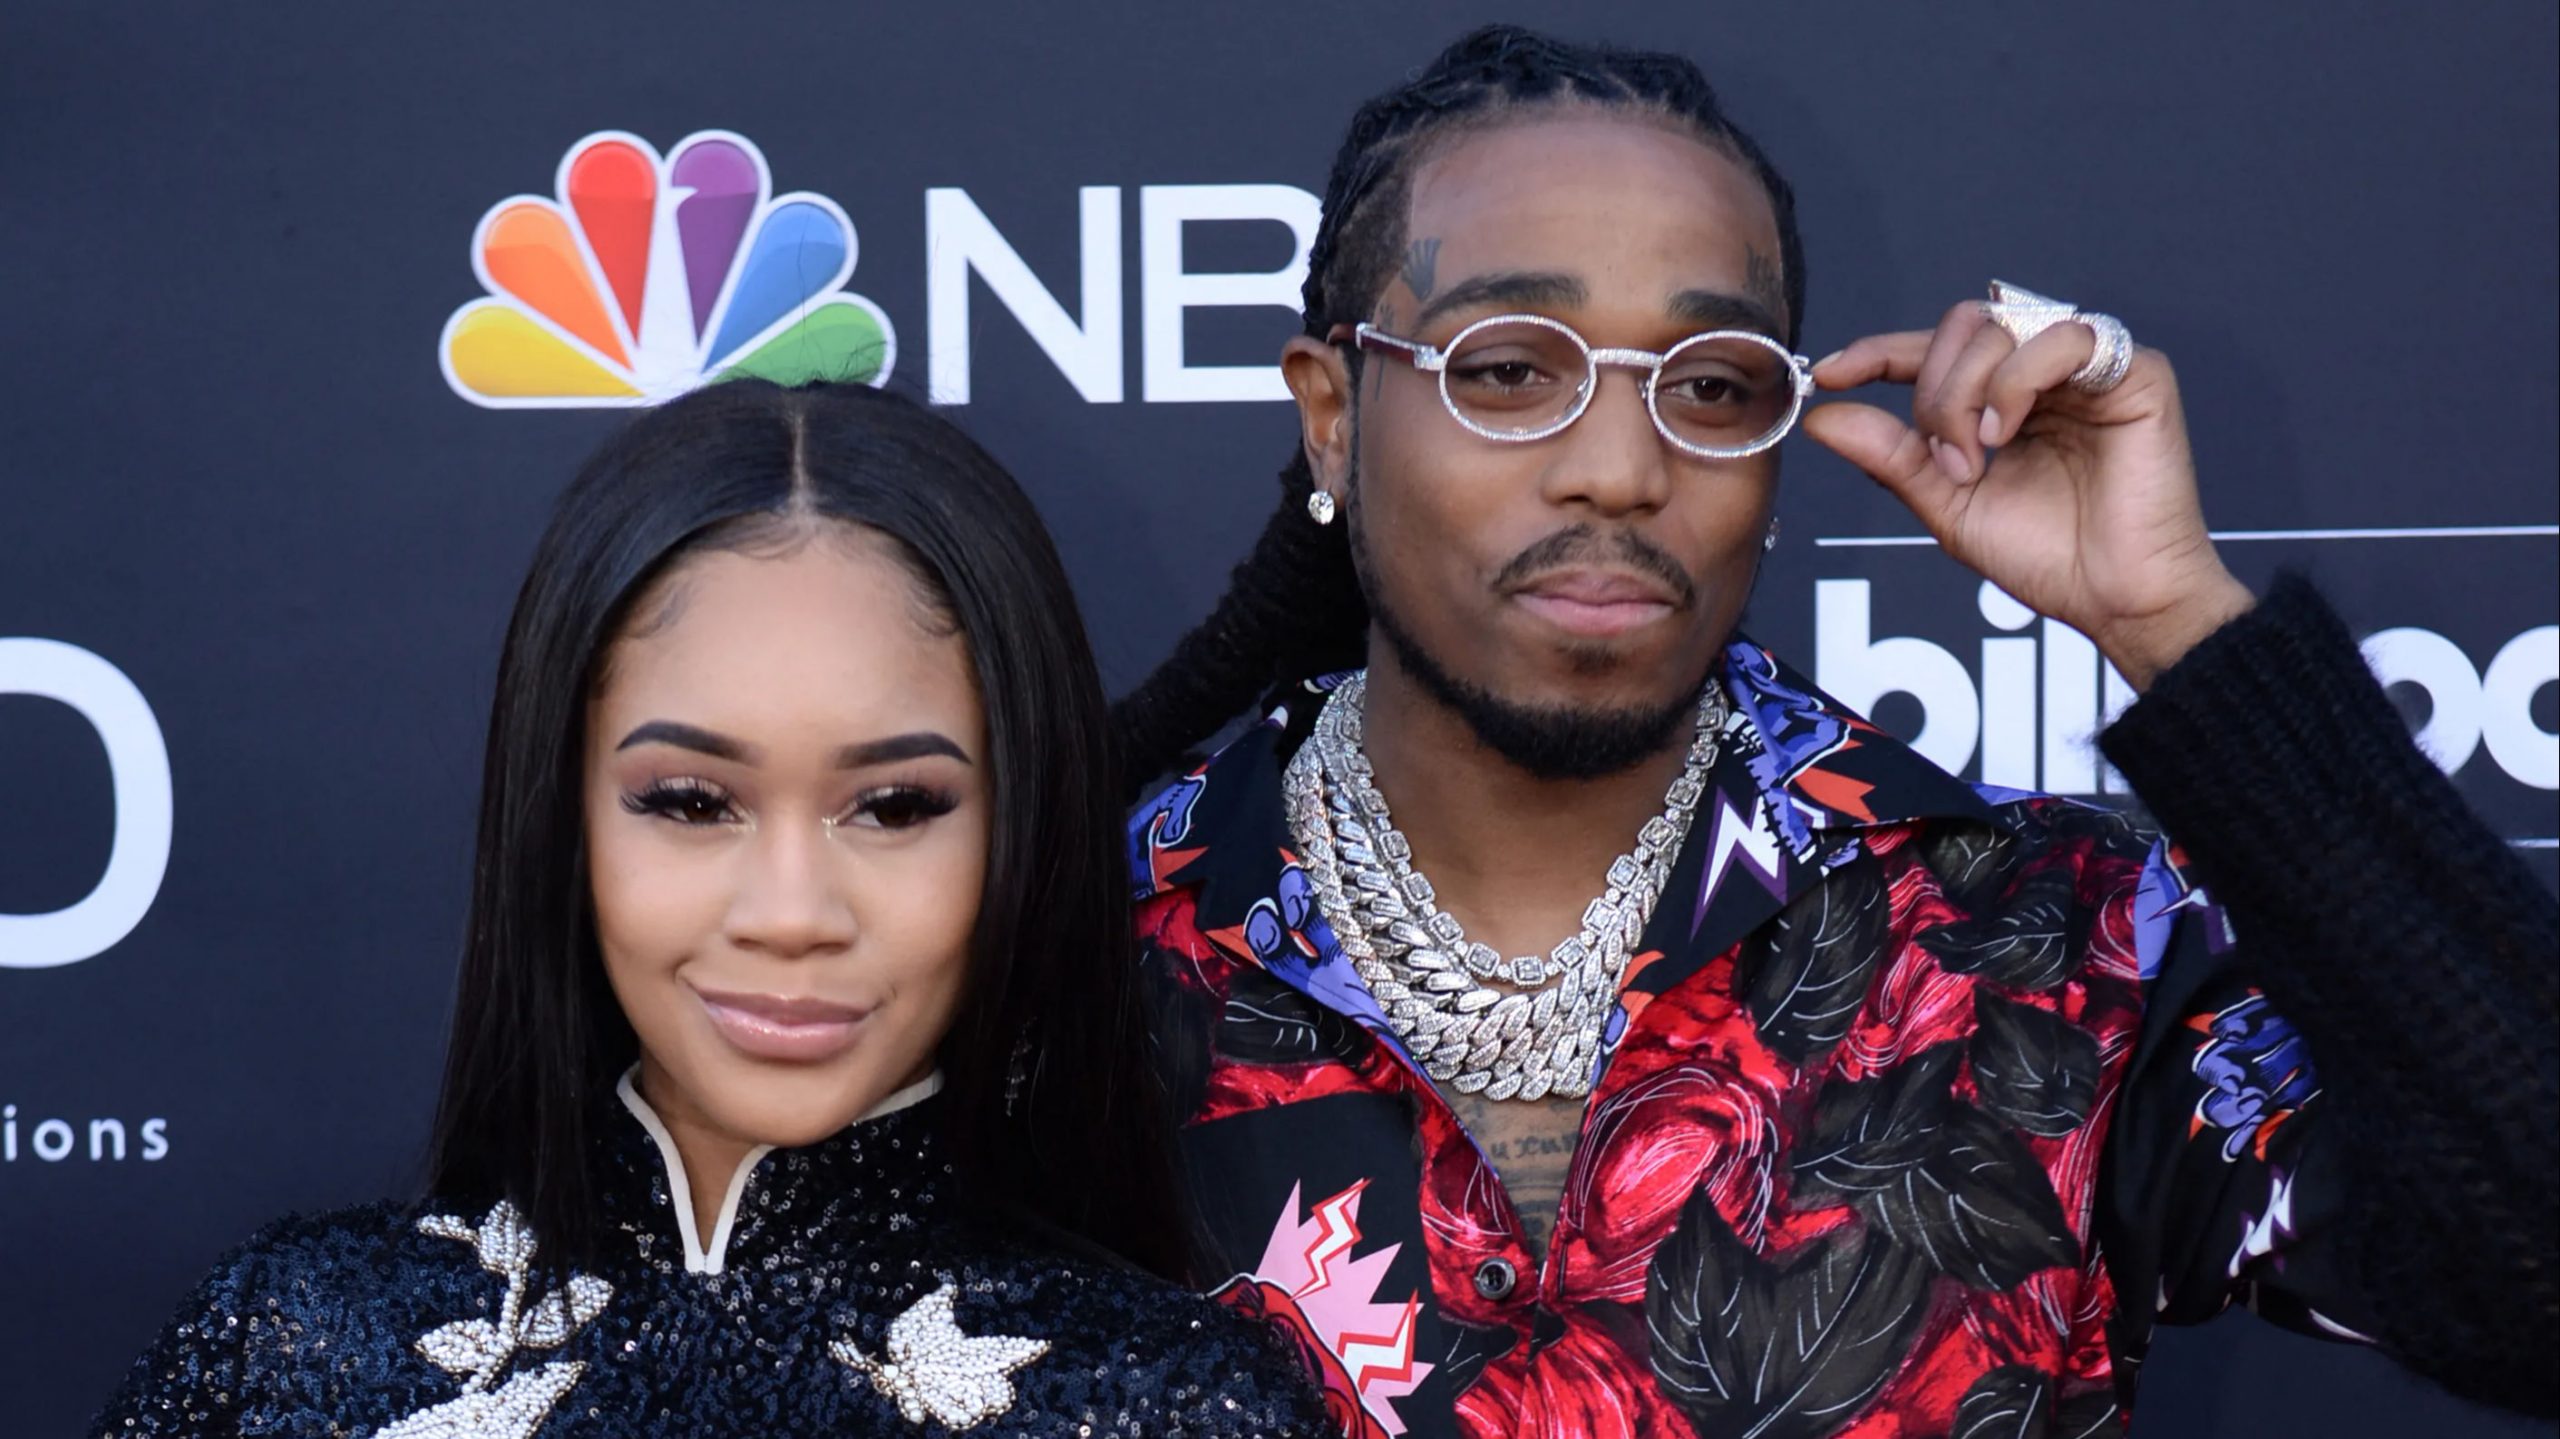 Rapper Saweetie calls it quits with Quavo, says ‘endured too much betrayal’